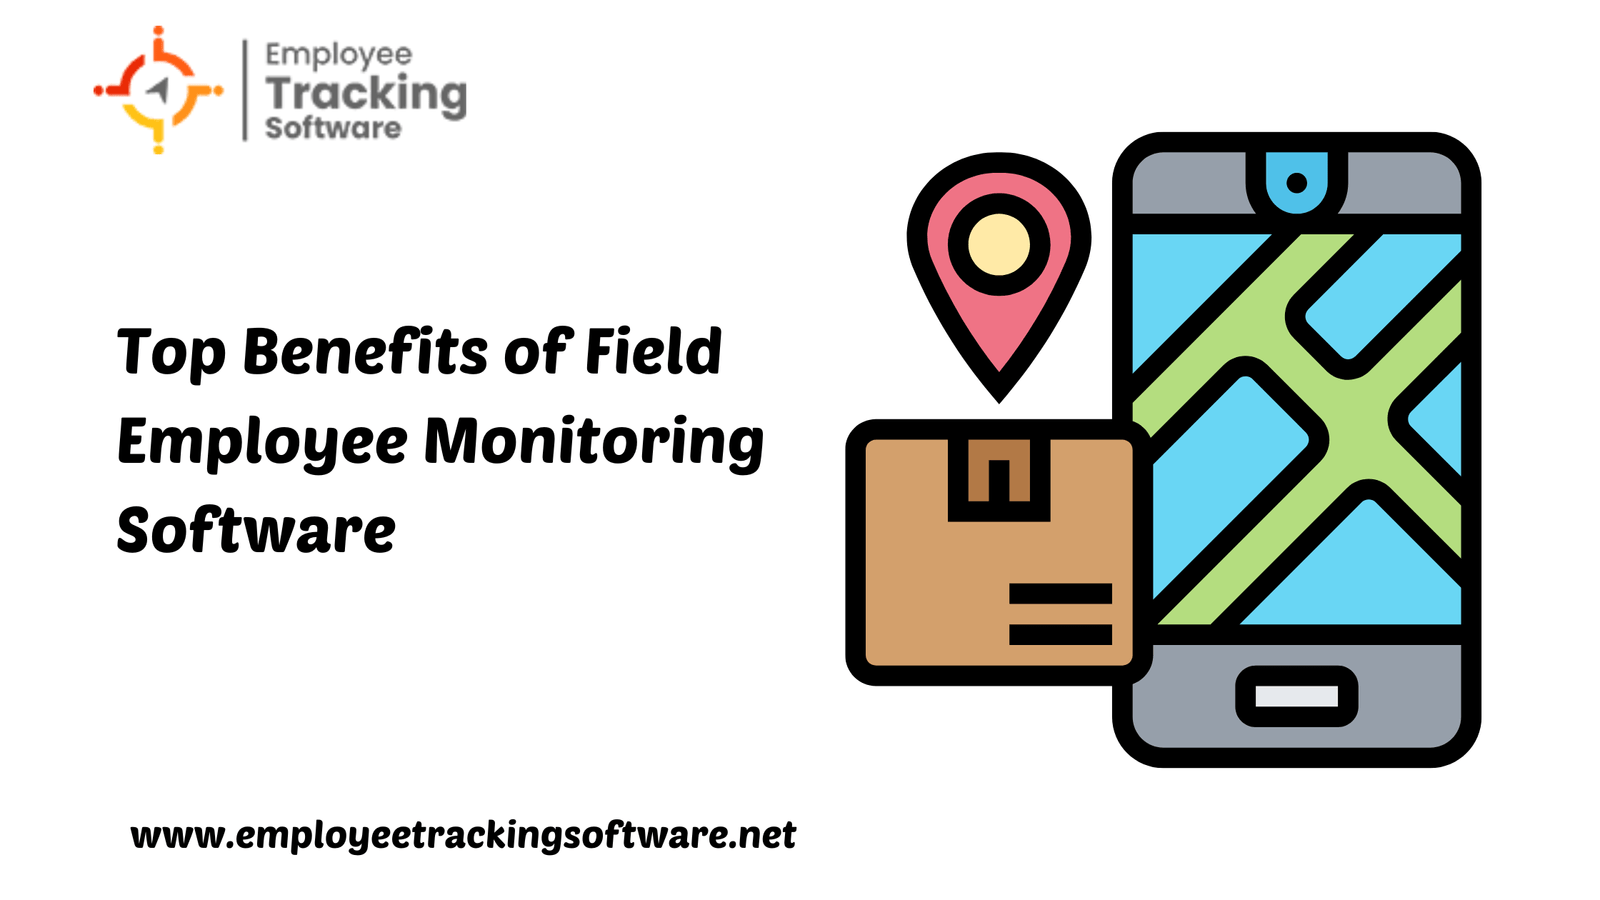 Top Benefits of Field Employee Monitoring Software